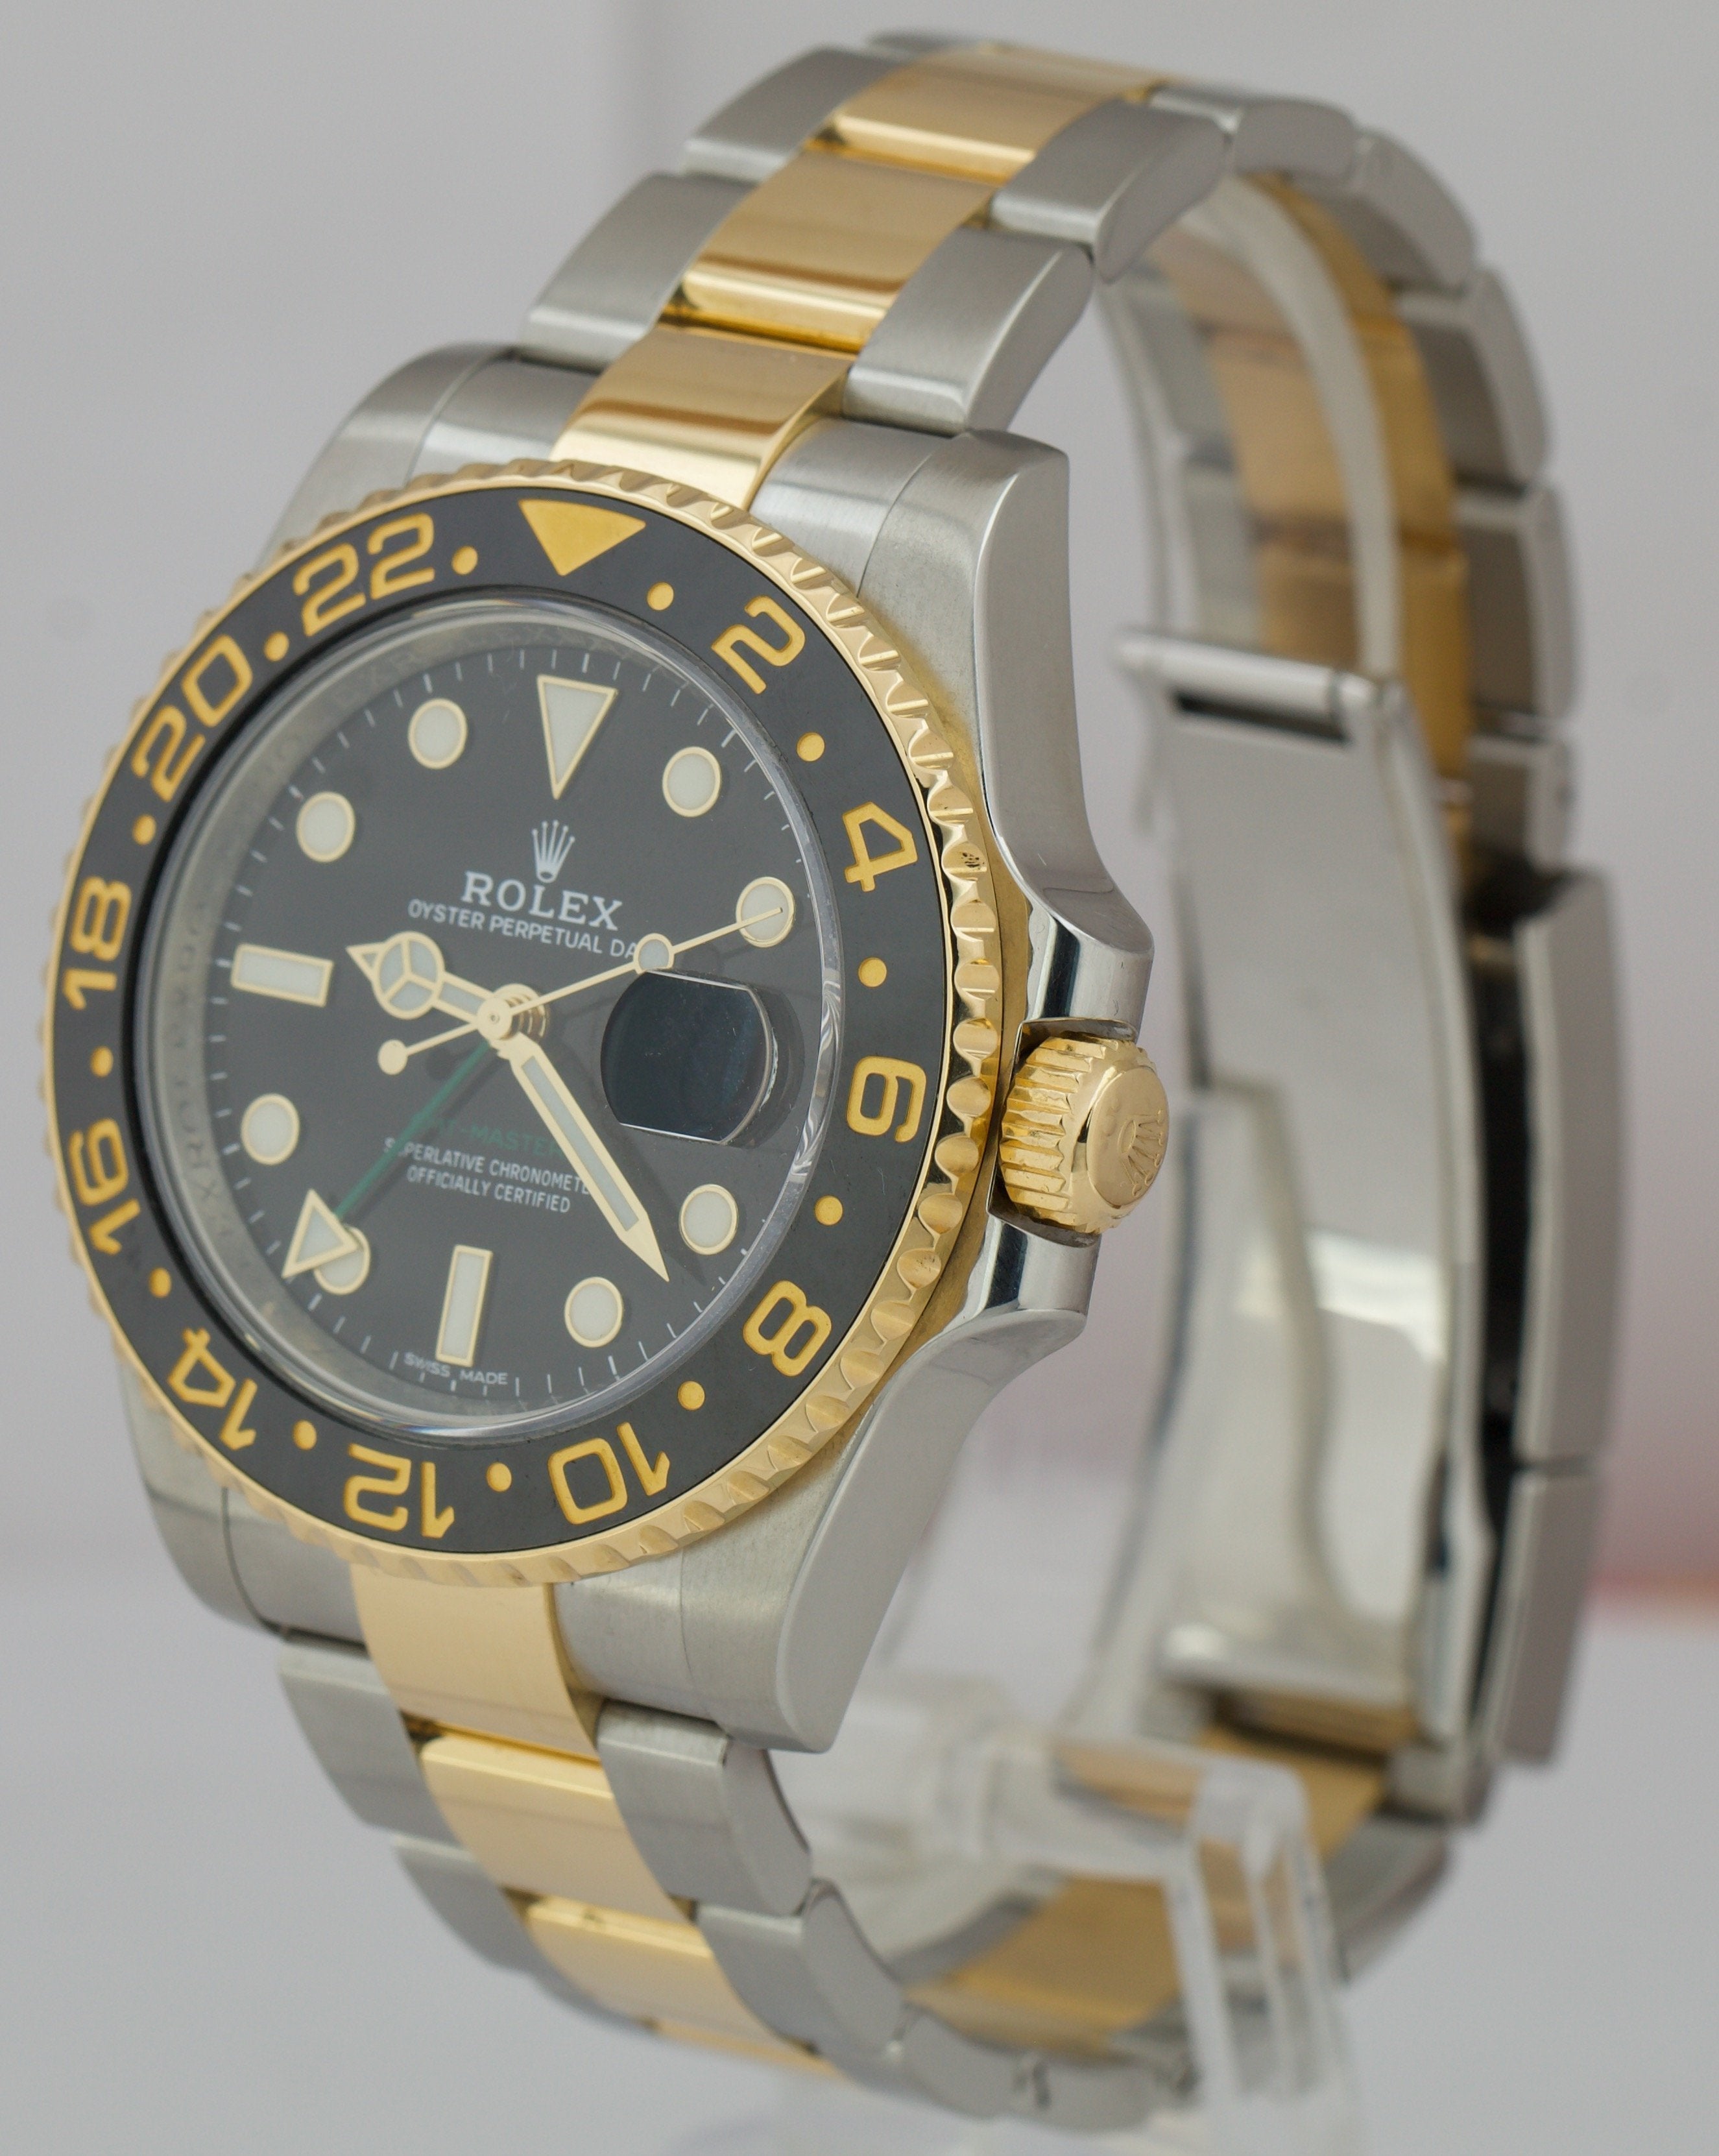 Rolex GMT-Master II Ceramic Black Two-Tone Stainless Date 40mm Watch 116713 LN